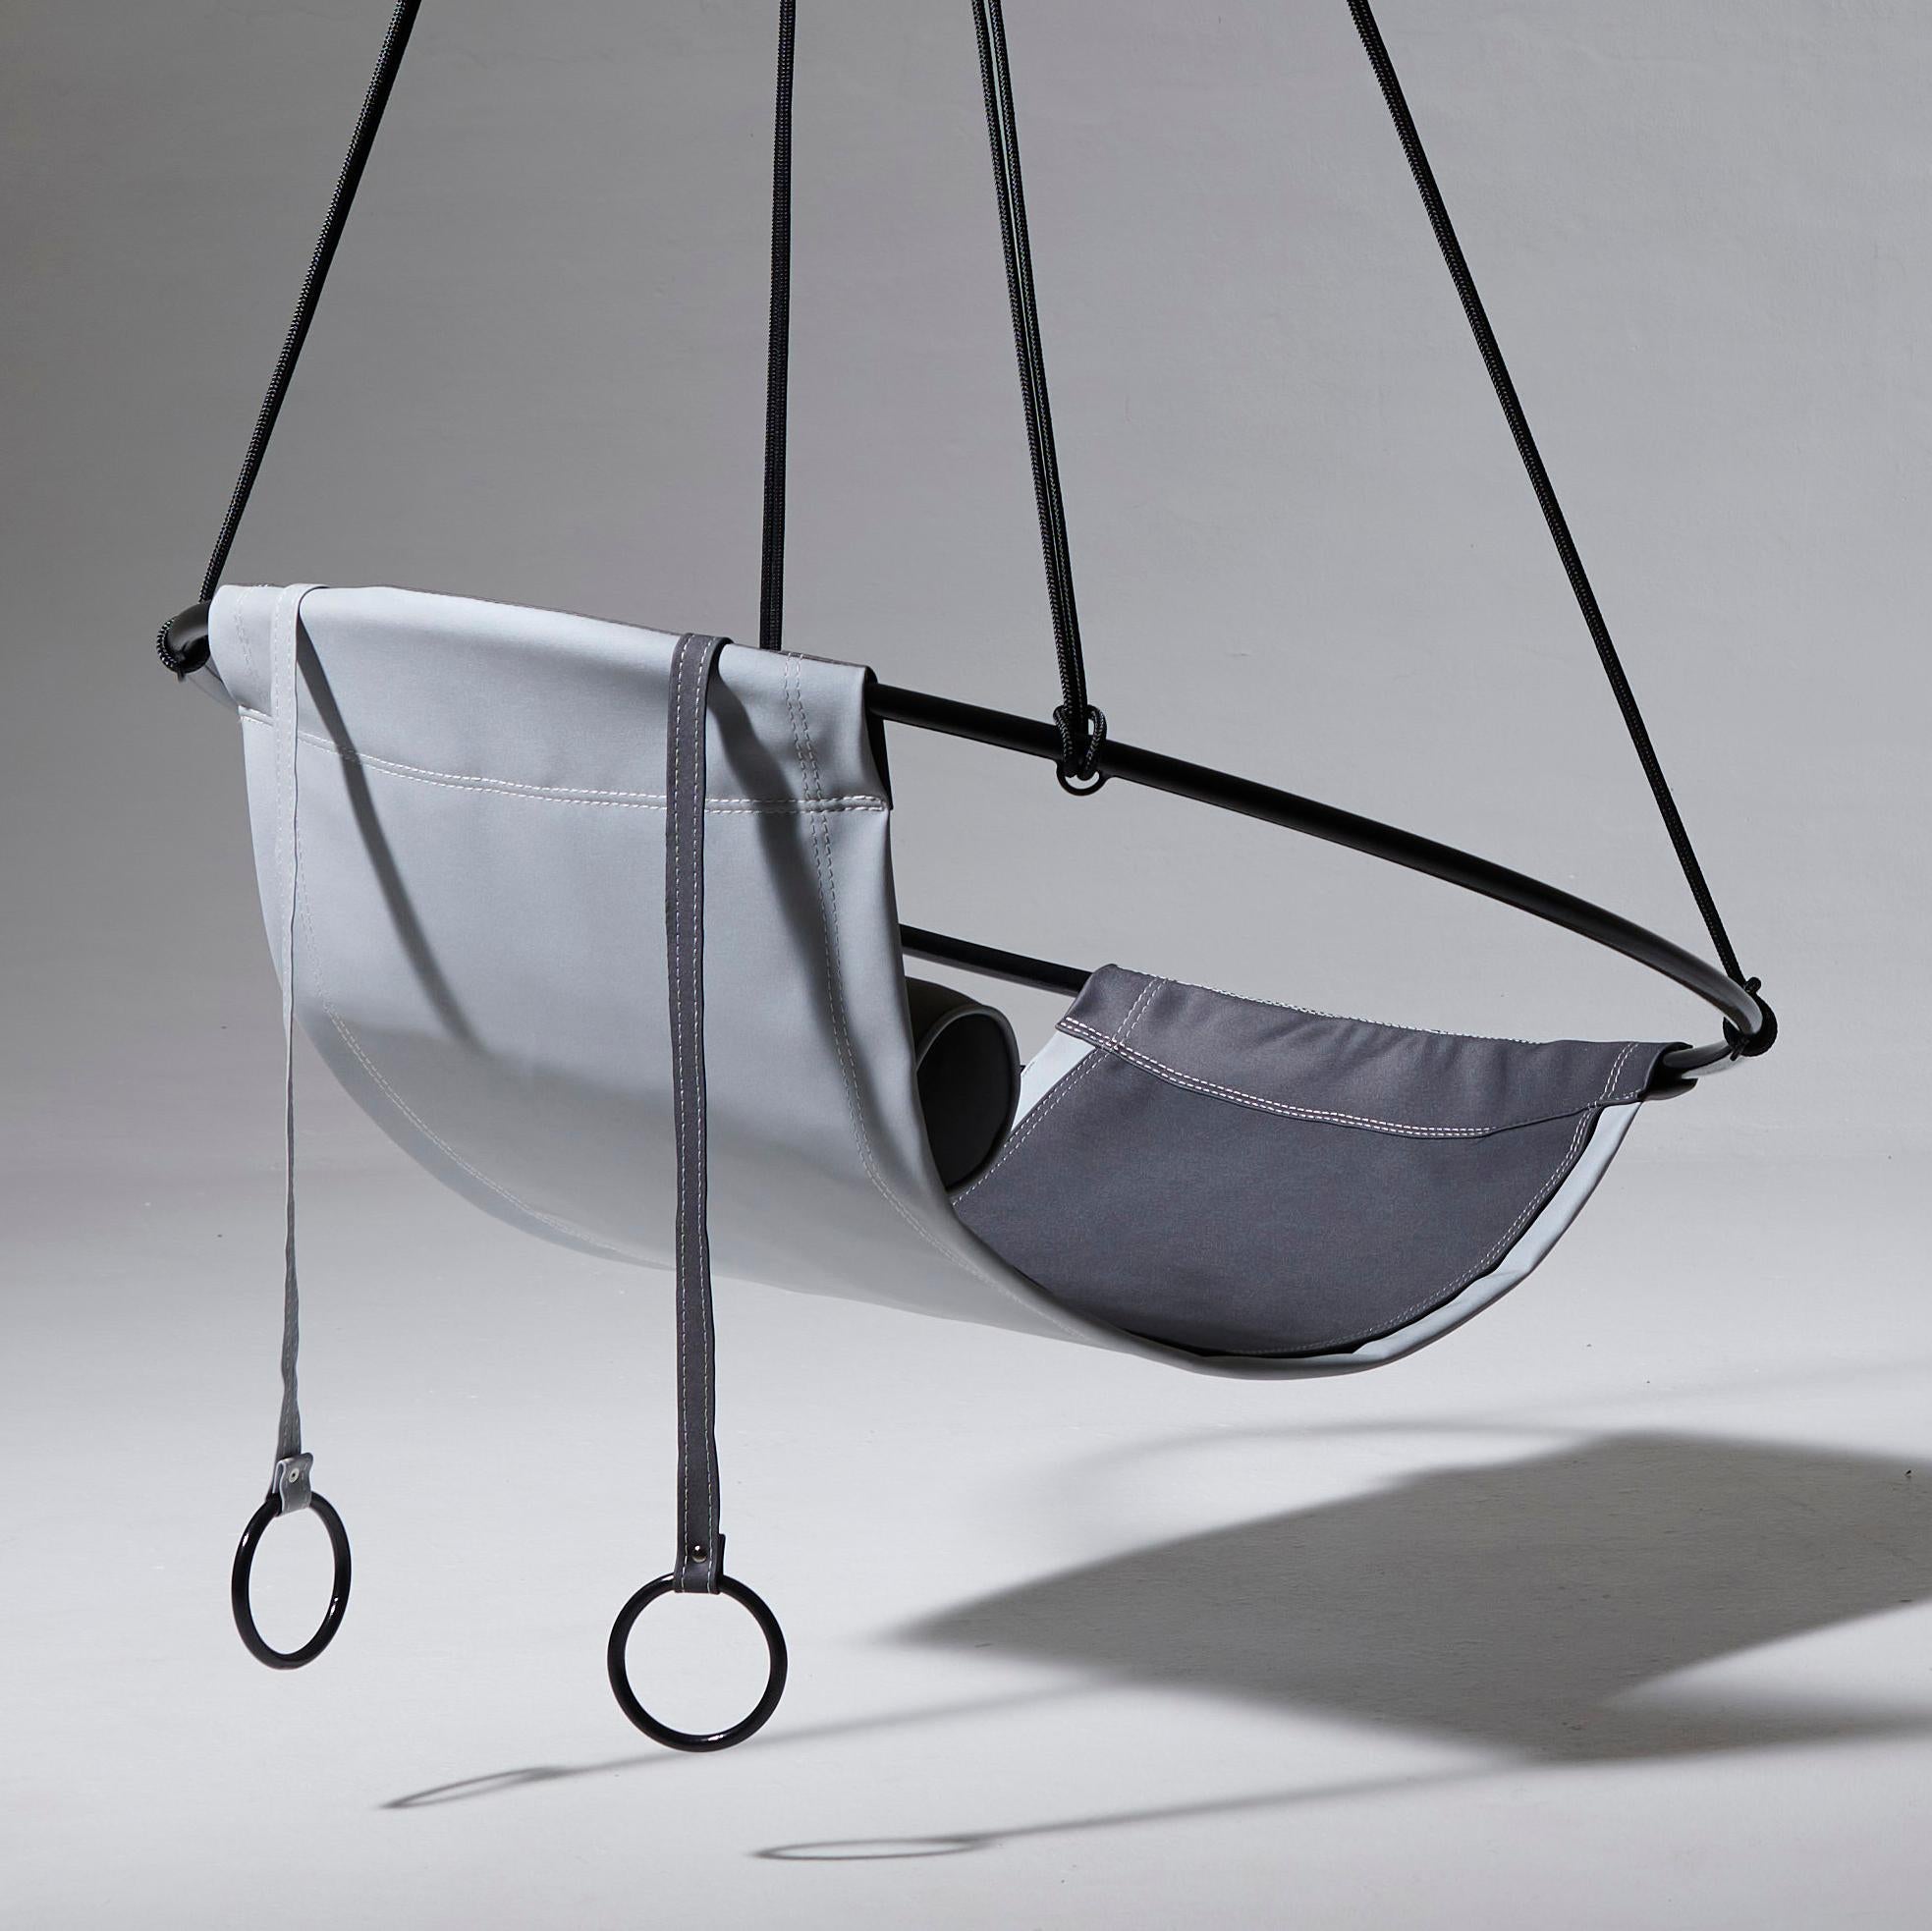 Modern Hanging Sling Chair for Outdoor in Greys In New Condition For Sale In Johannesburg, ZA